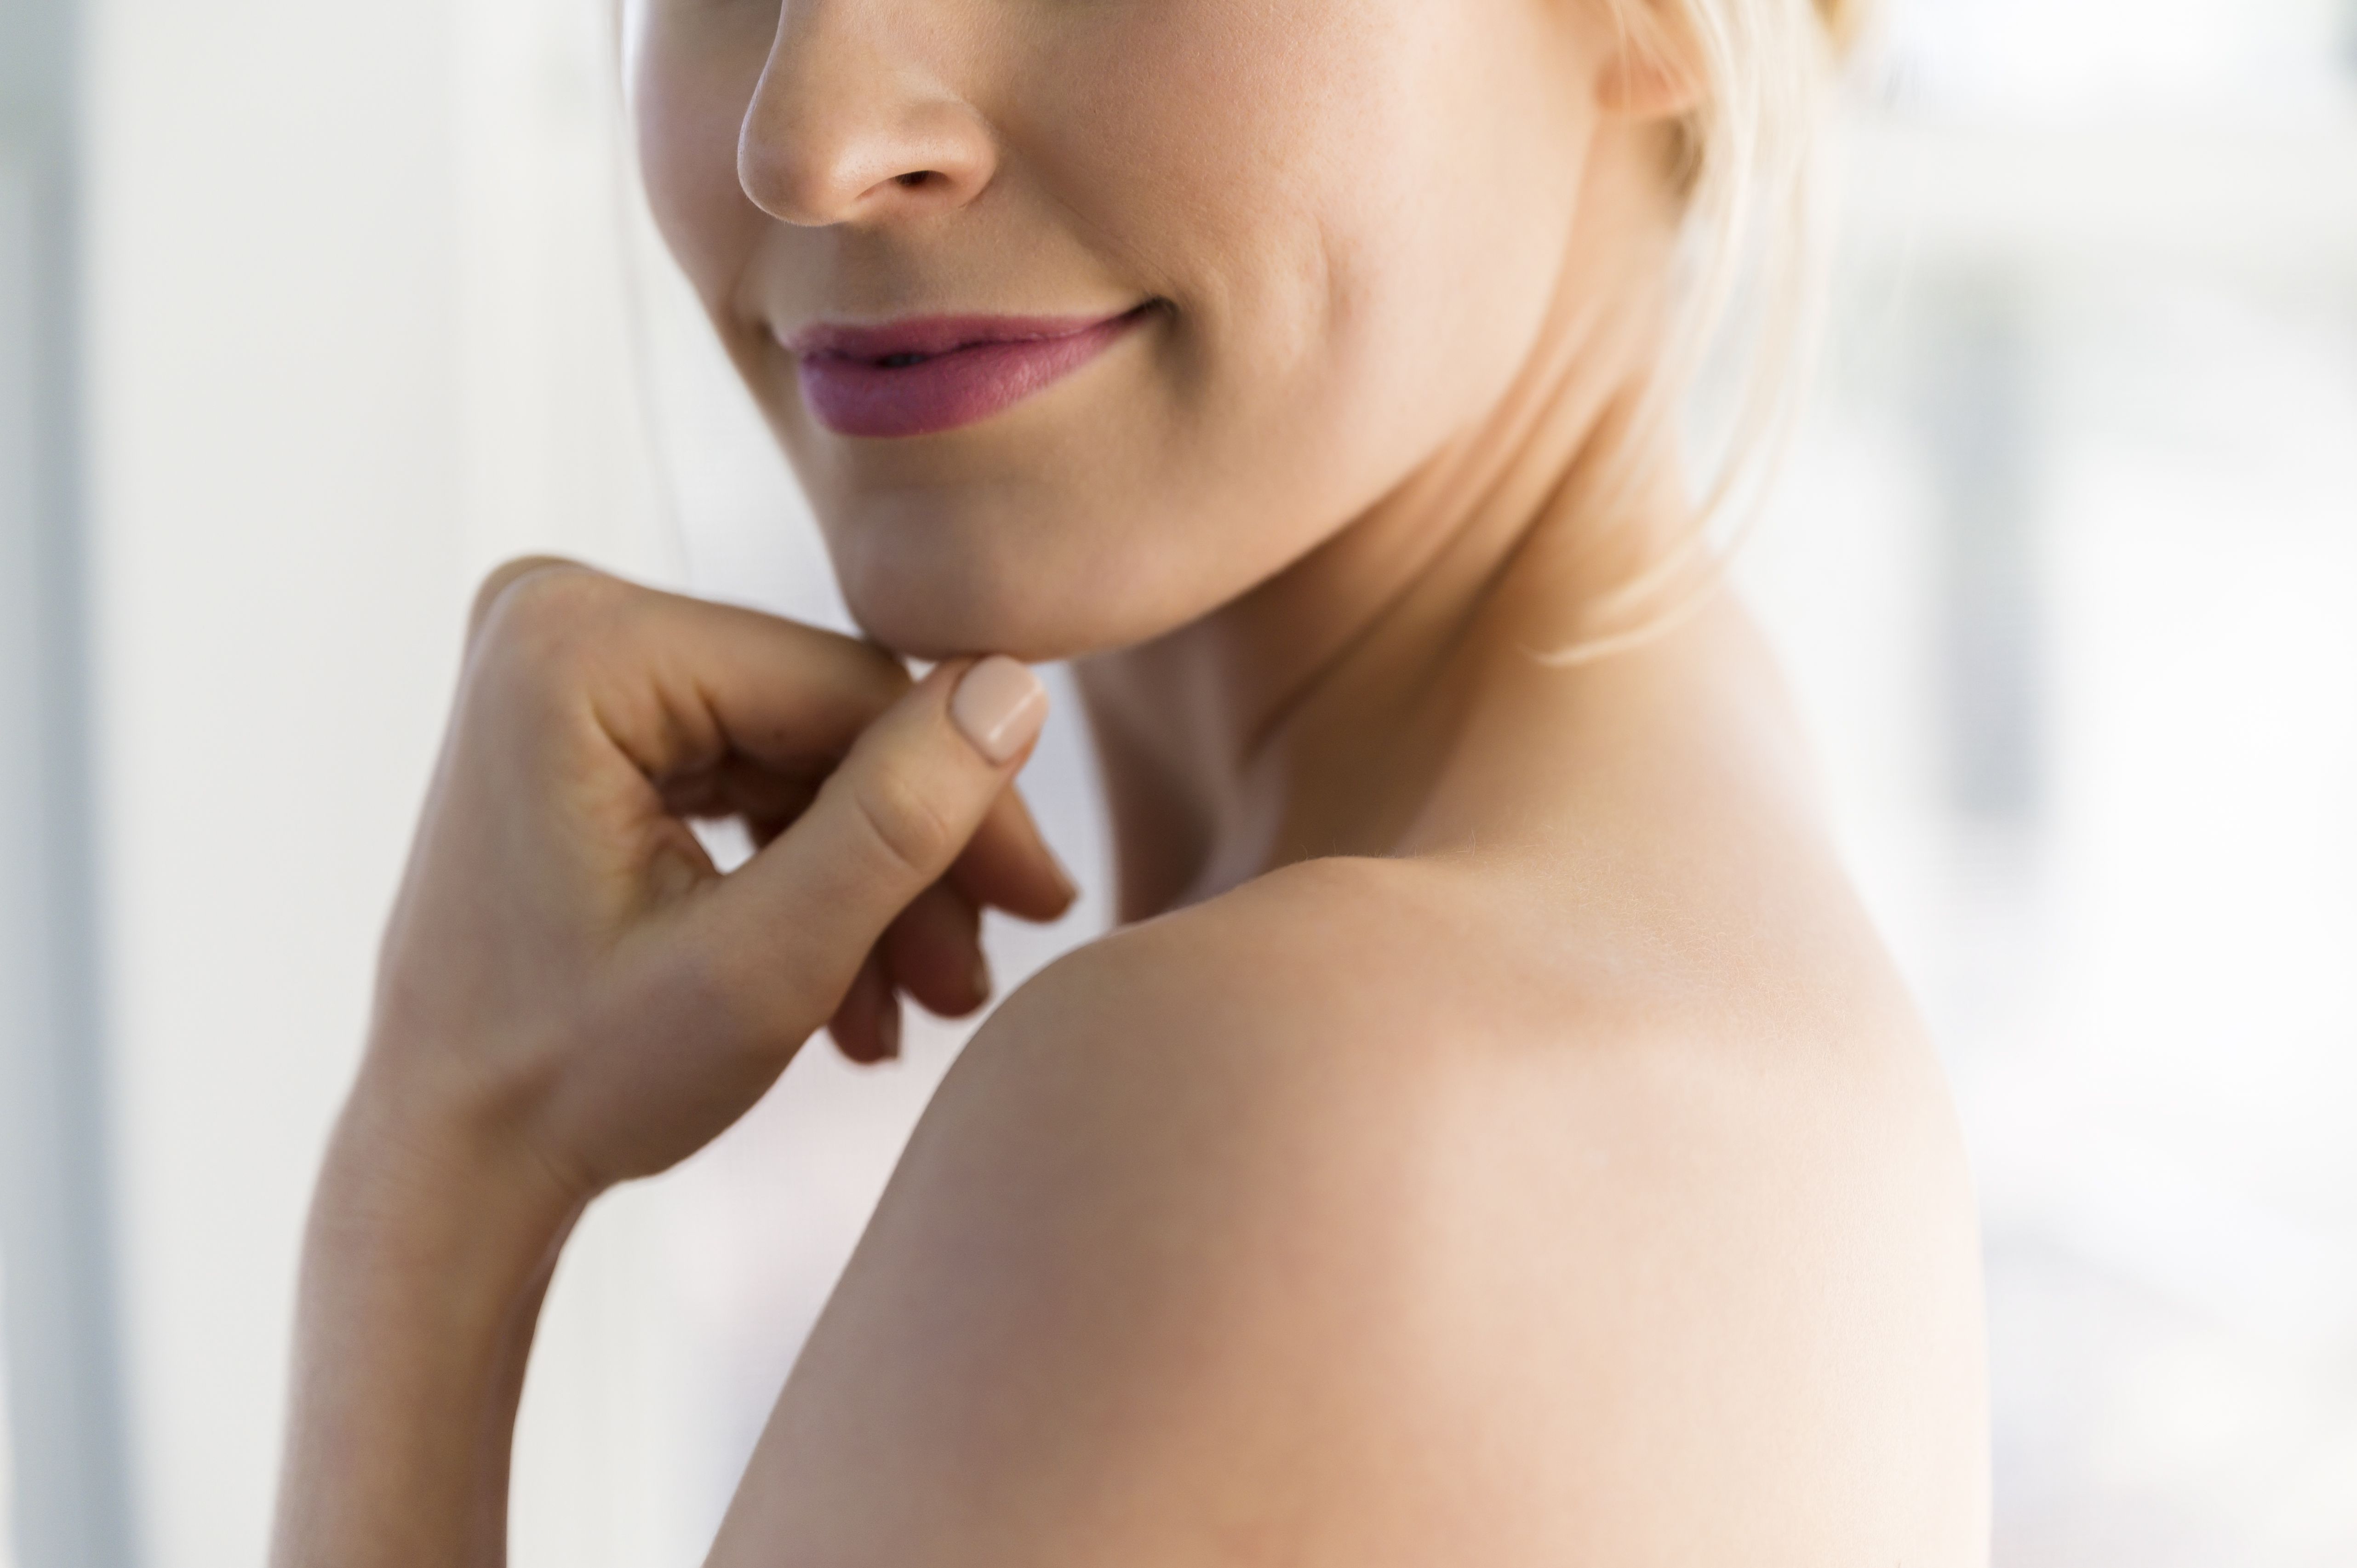 close up of woman's smile and bare shoulder